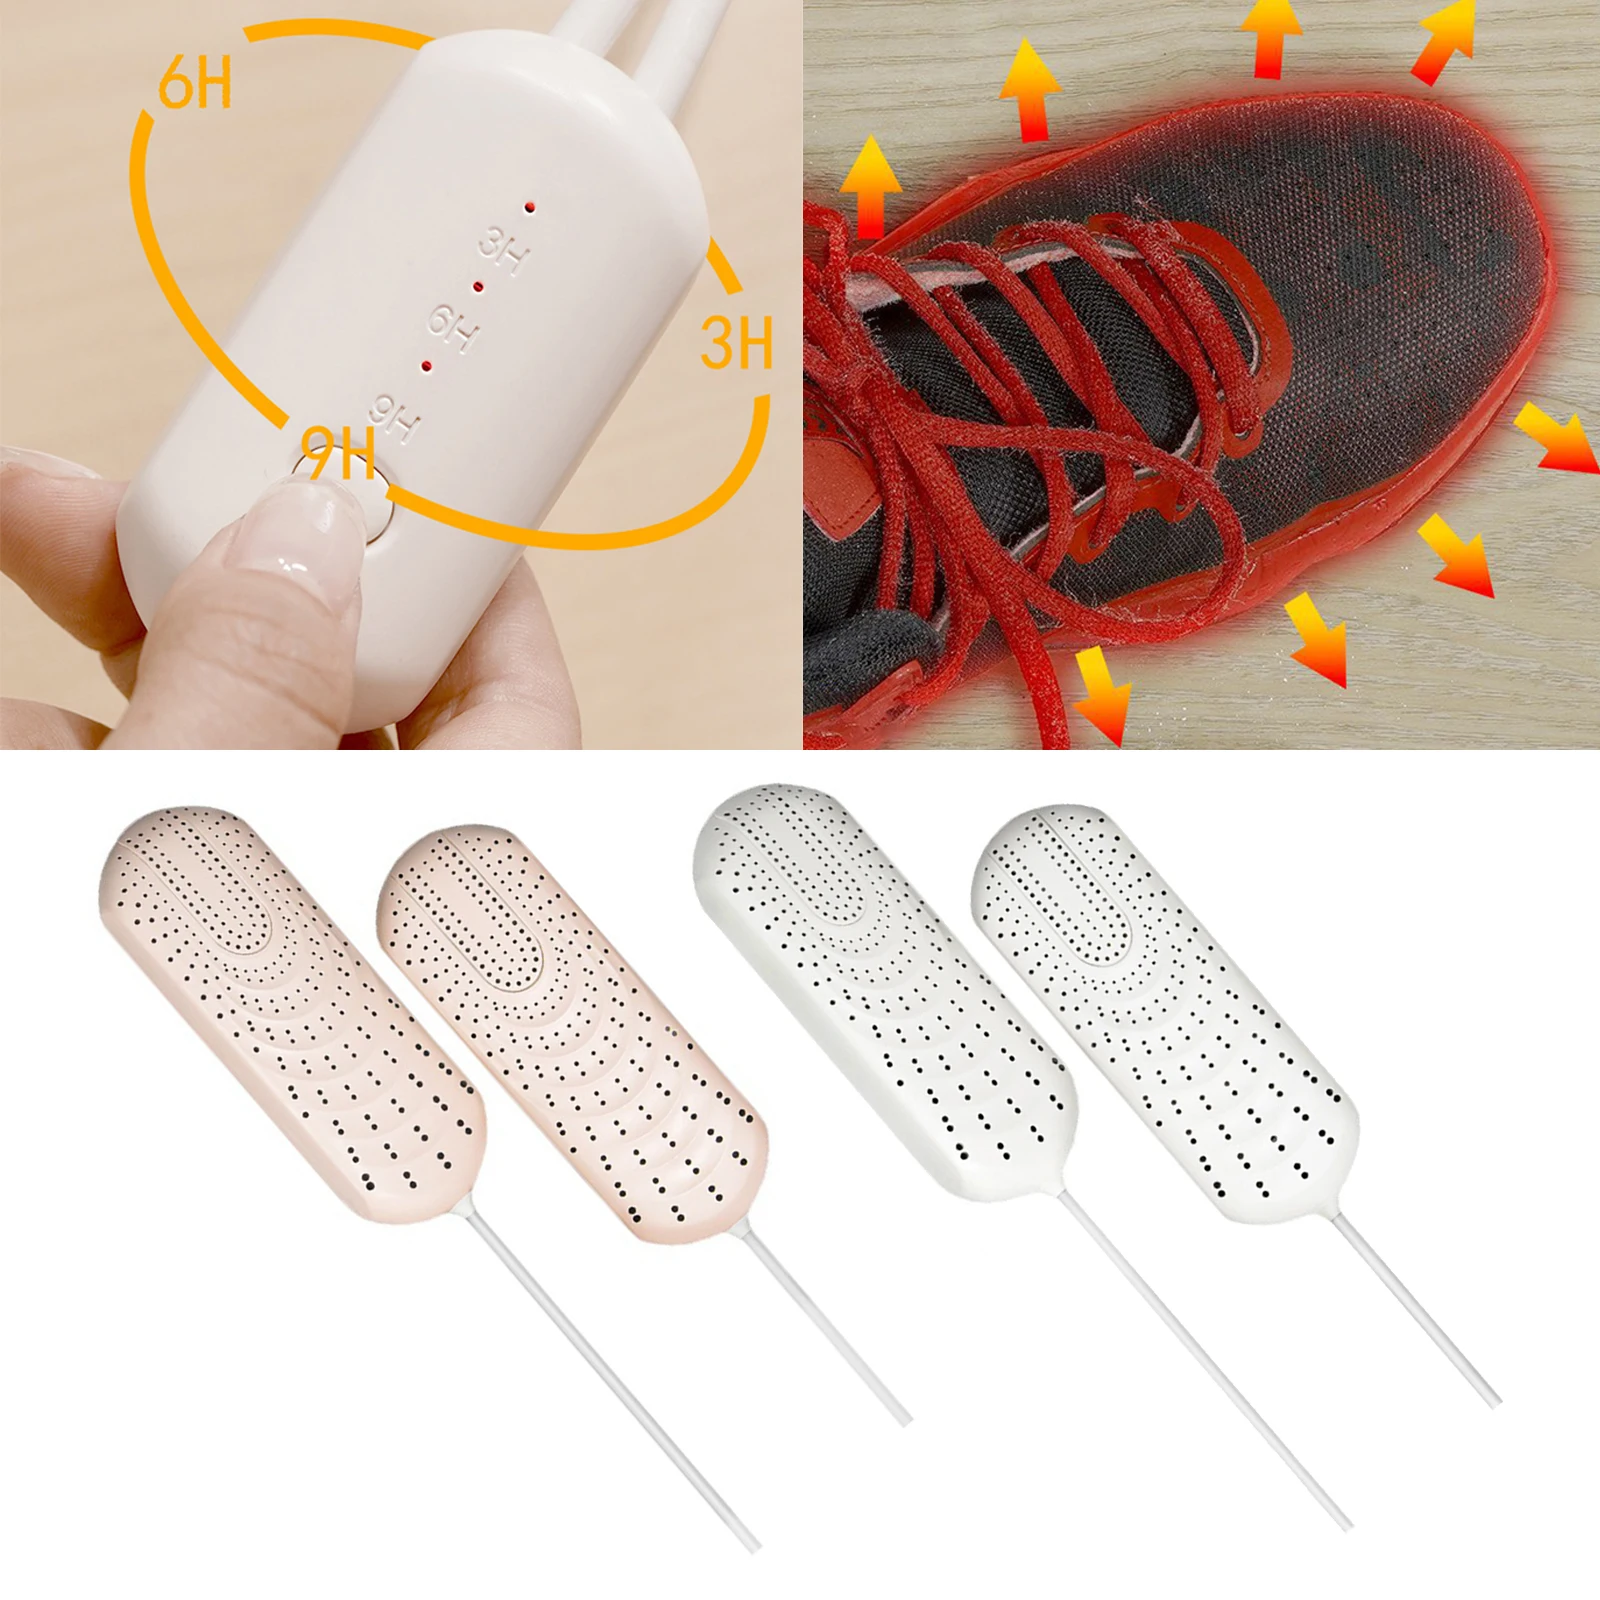 Sport Wet Foot Warmer Electric Shoes Dryer Deodorizer Leather Shoes Canvas Boot Dehumidify Heater Disinfectant